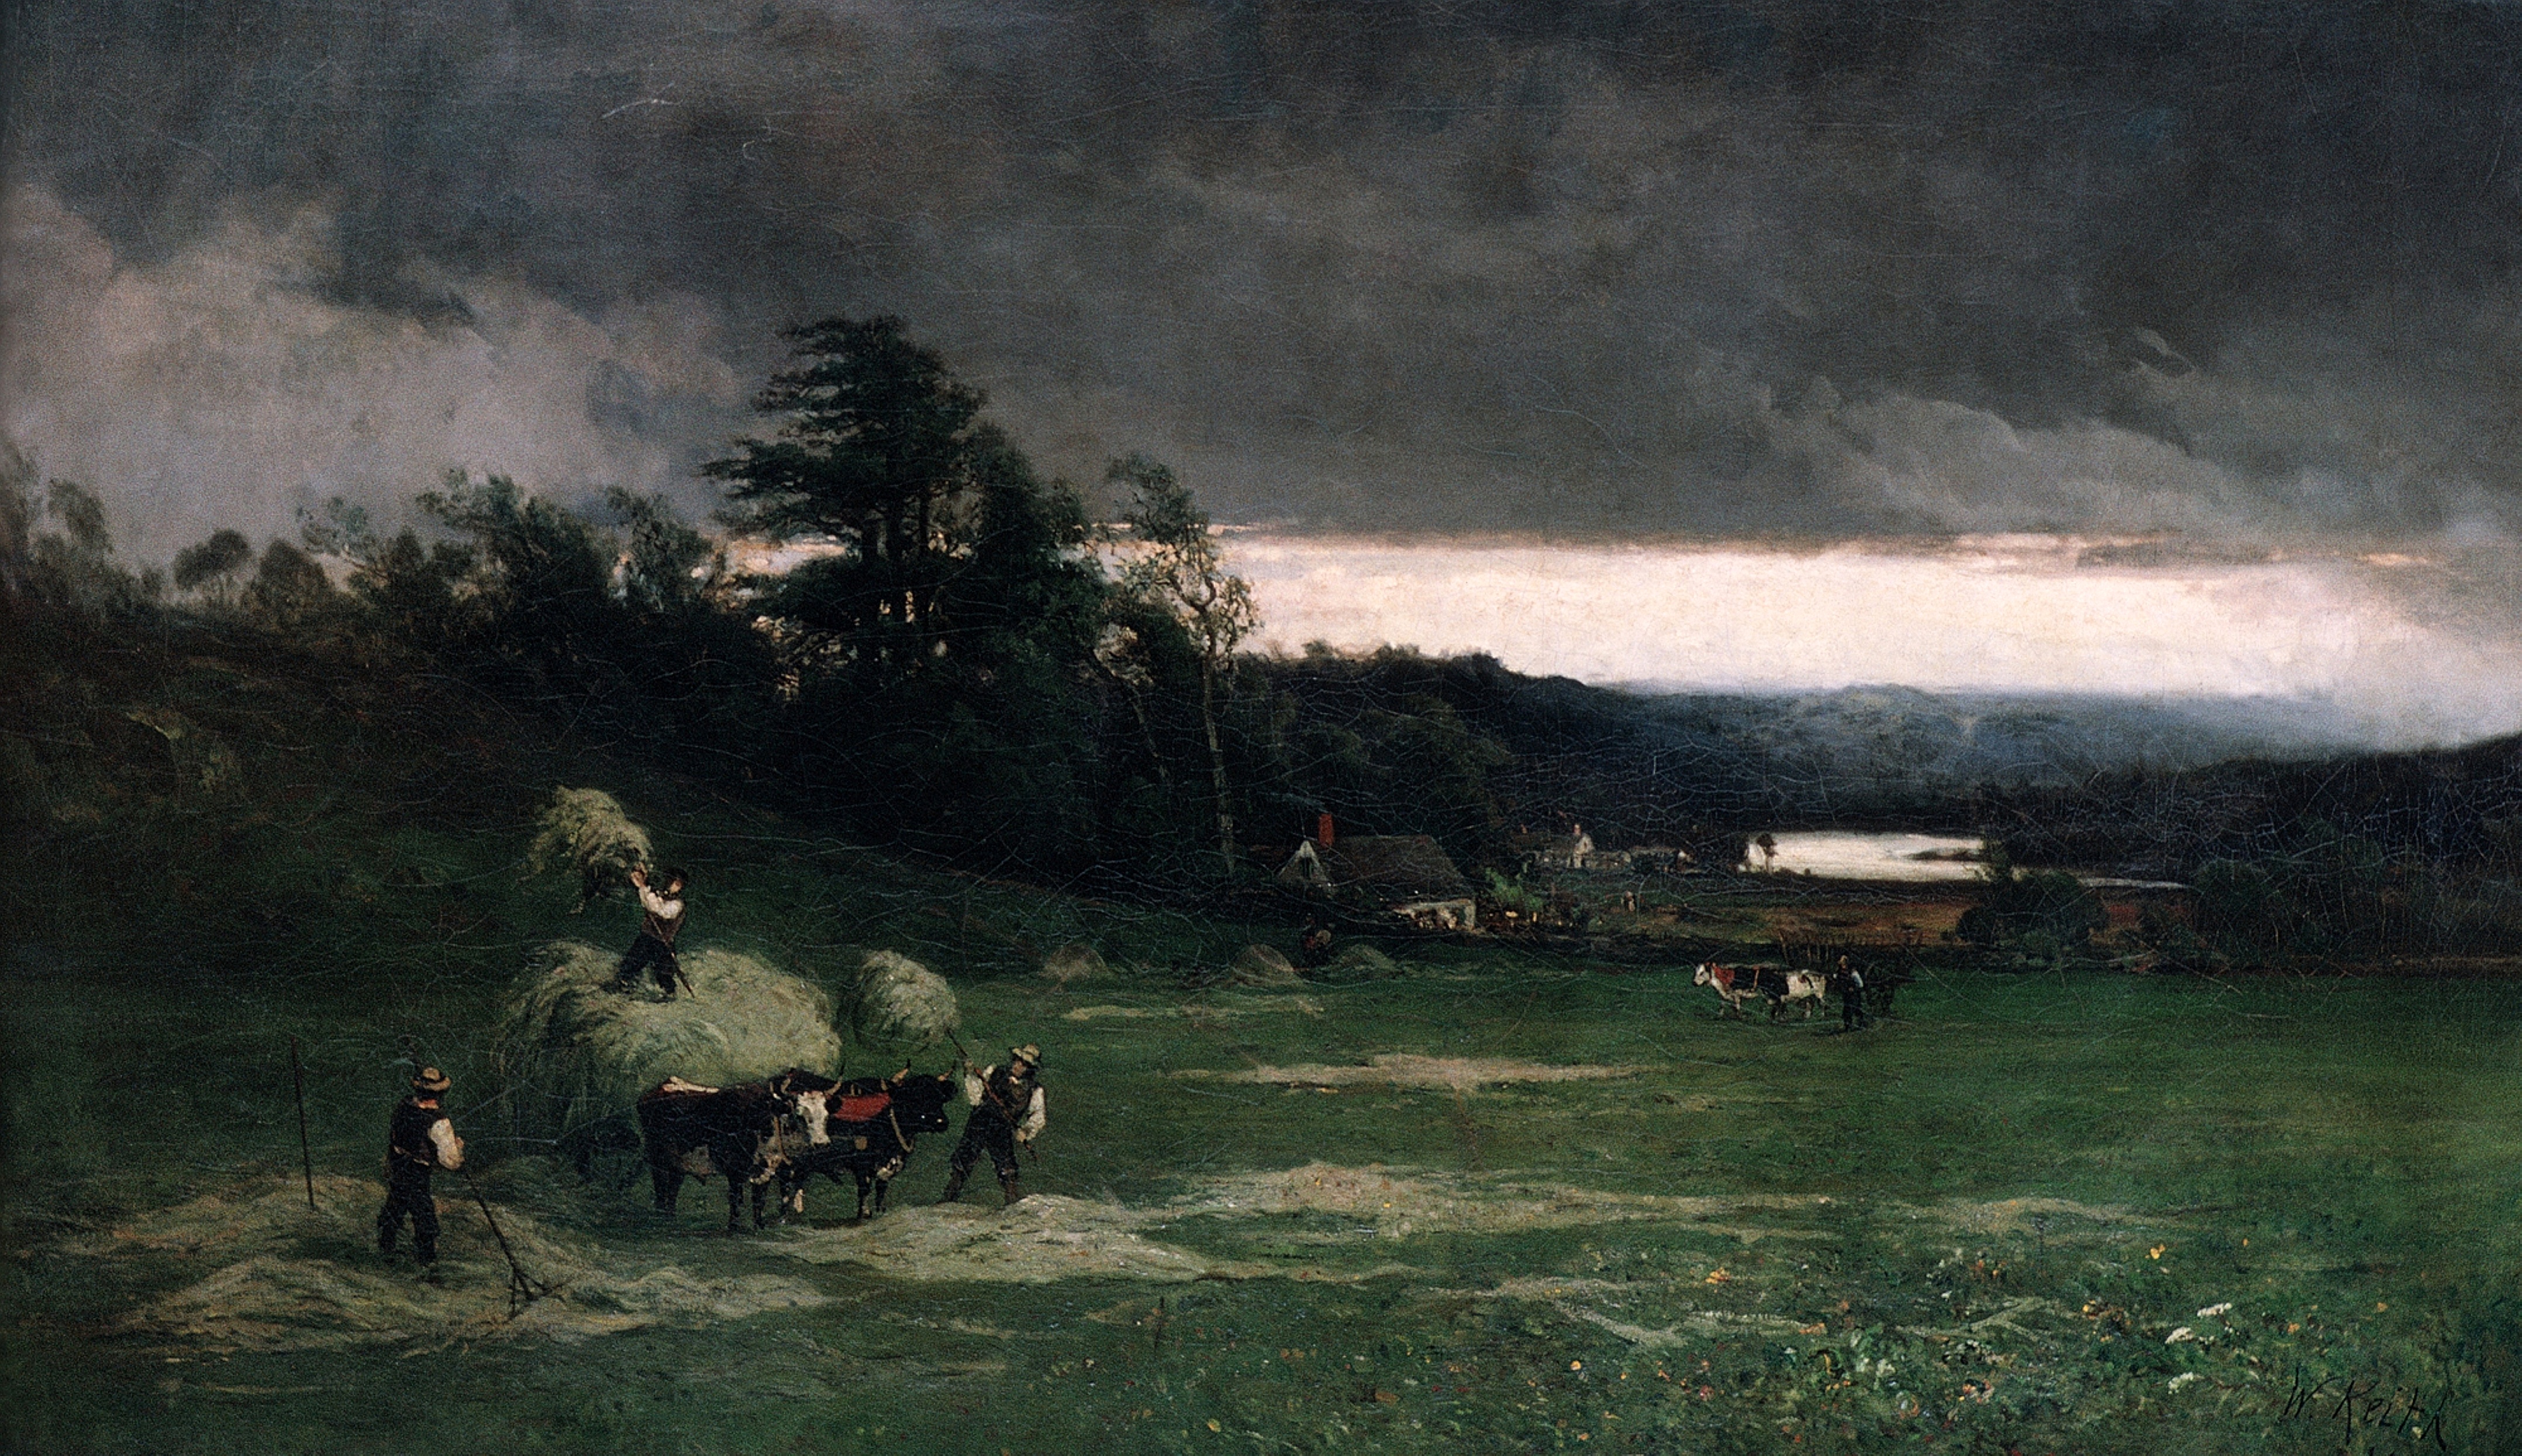 File:Approaching Storm by William Keith, 1880.jpg - Wikimedia Commons